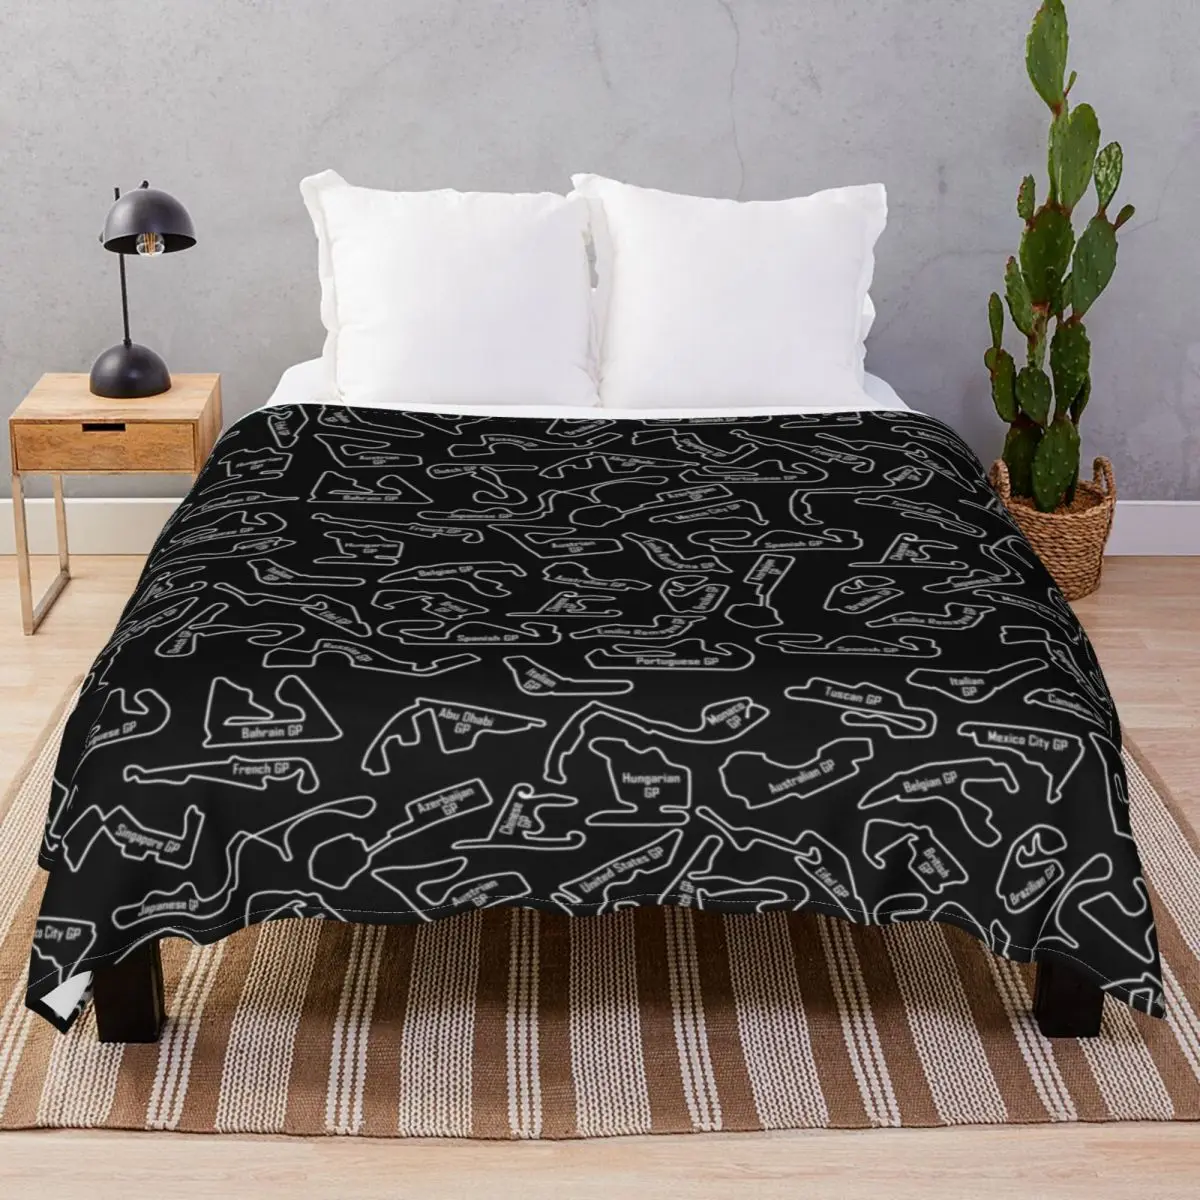 Race Circuits Pattern Blankets Flannel Autumn Fluffy Throw Blanket for Bedding Sofa Travel Cinema